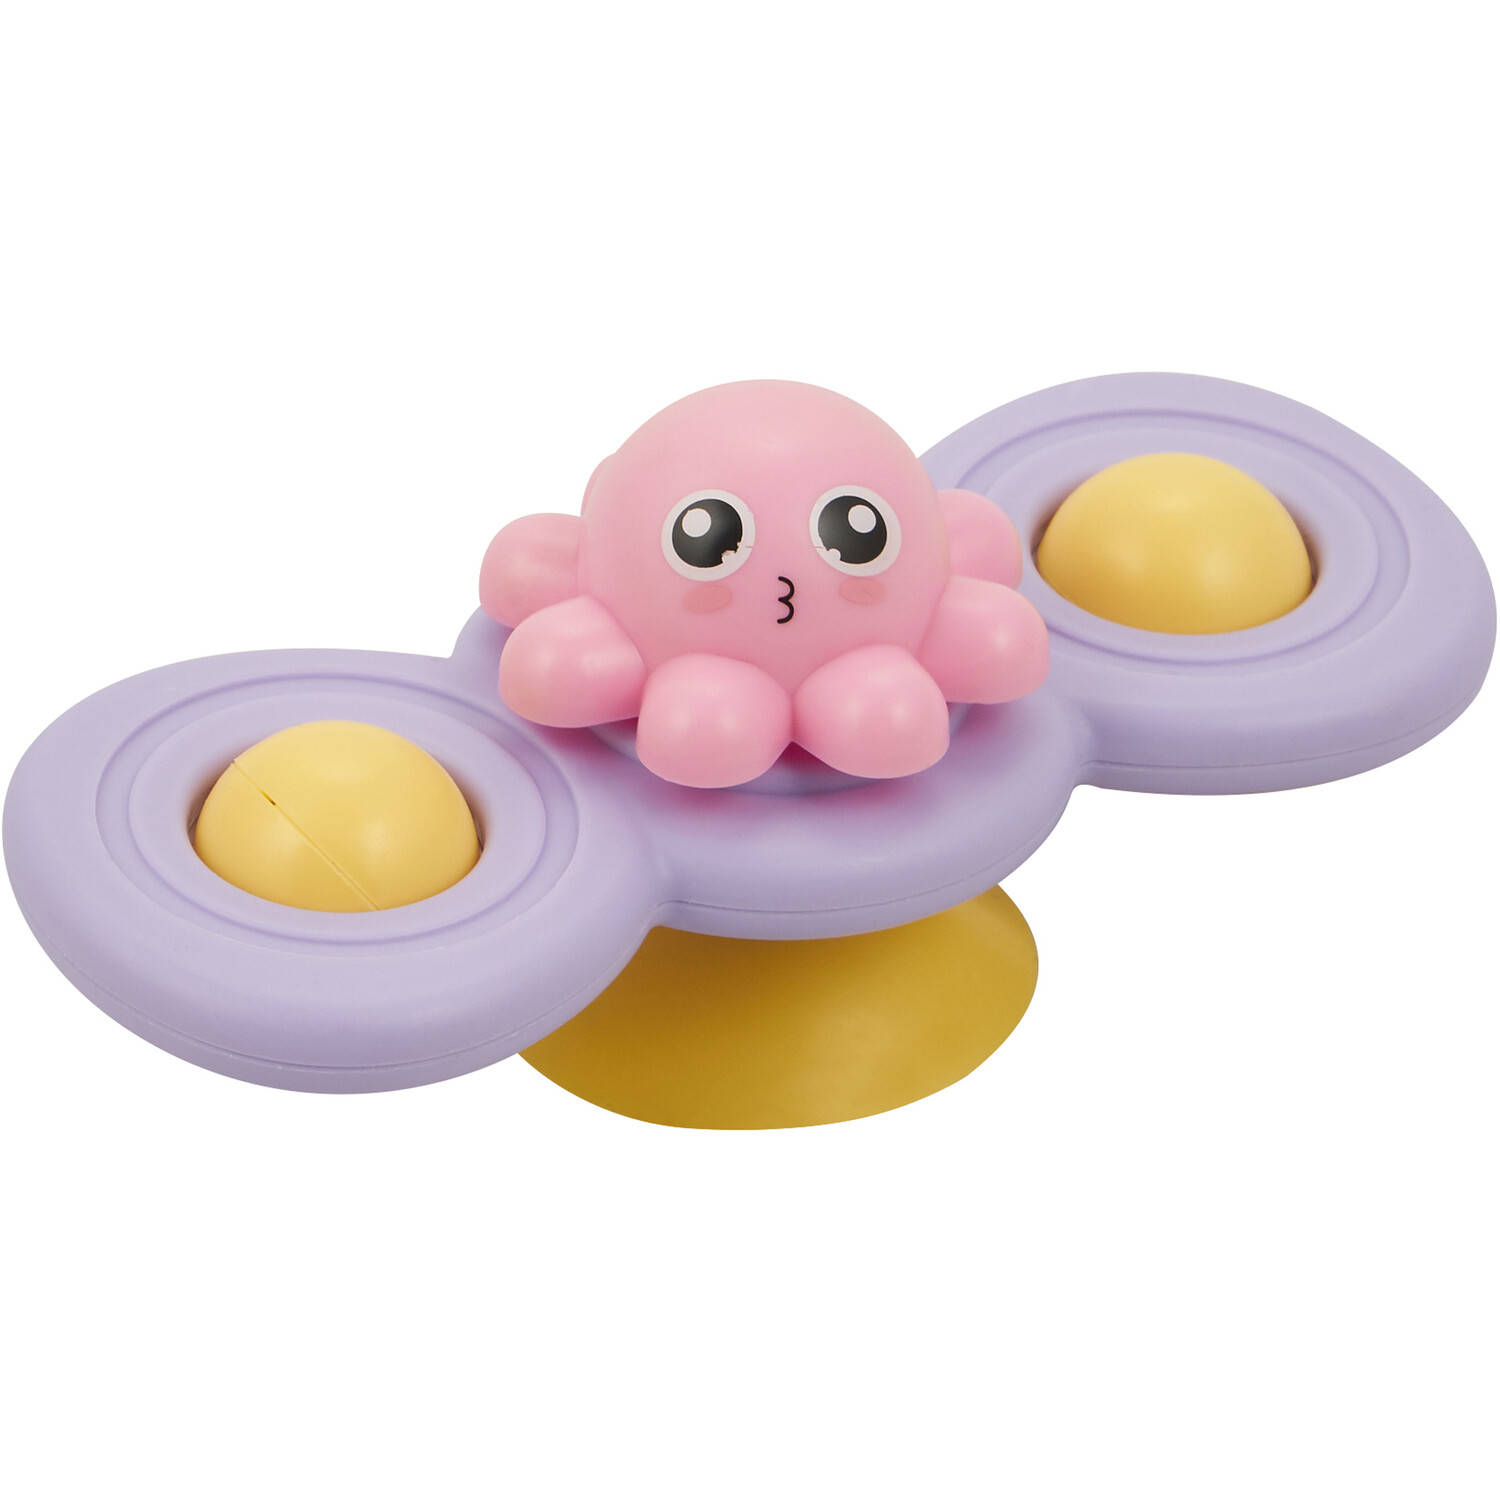 ToyMania Suction Spinners Bath Toy 3 Pack Image 2